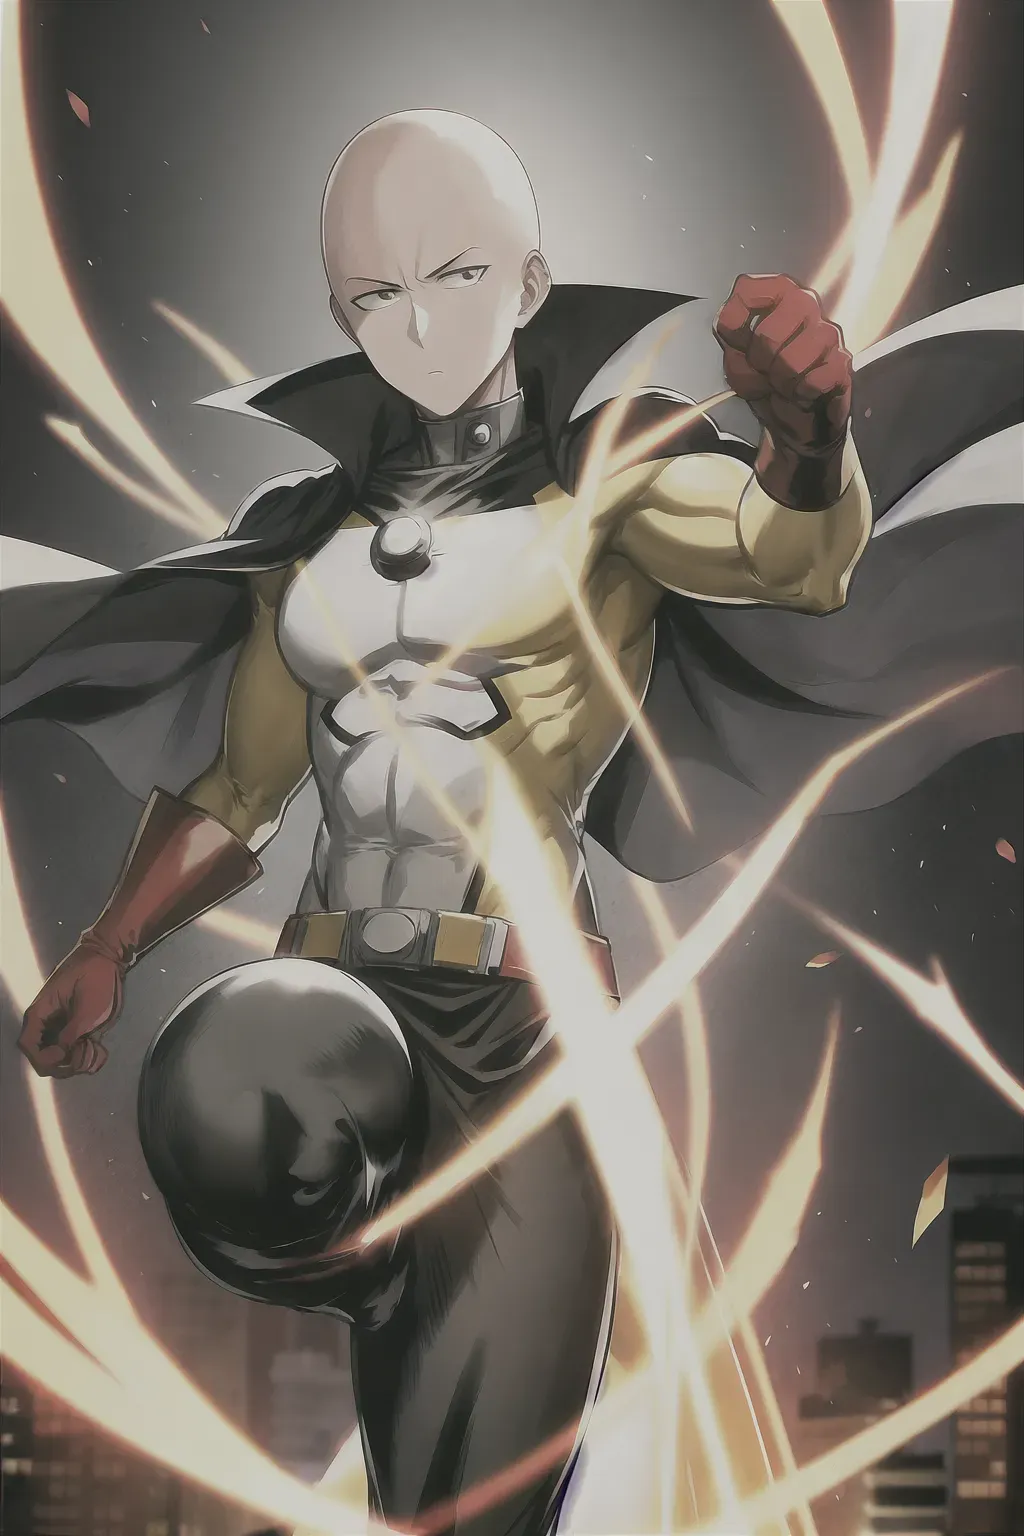 Dopamine Girl - One punch man, anime, bald head, 8k wallpaper, black eyes,  best quality, ultra hd, global lighting, hi-resolution, high quality,  yellow costume, white cape, red gloves, red boots, punching towards